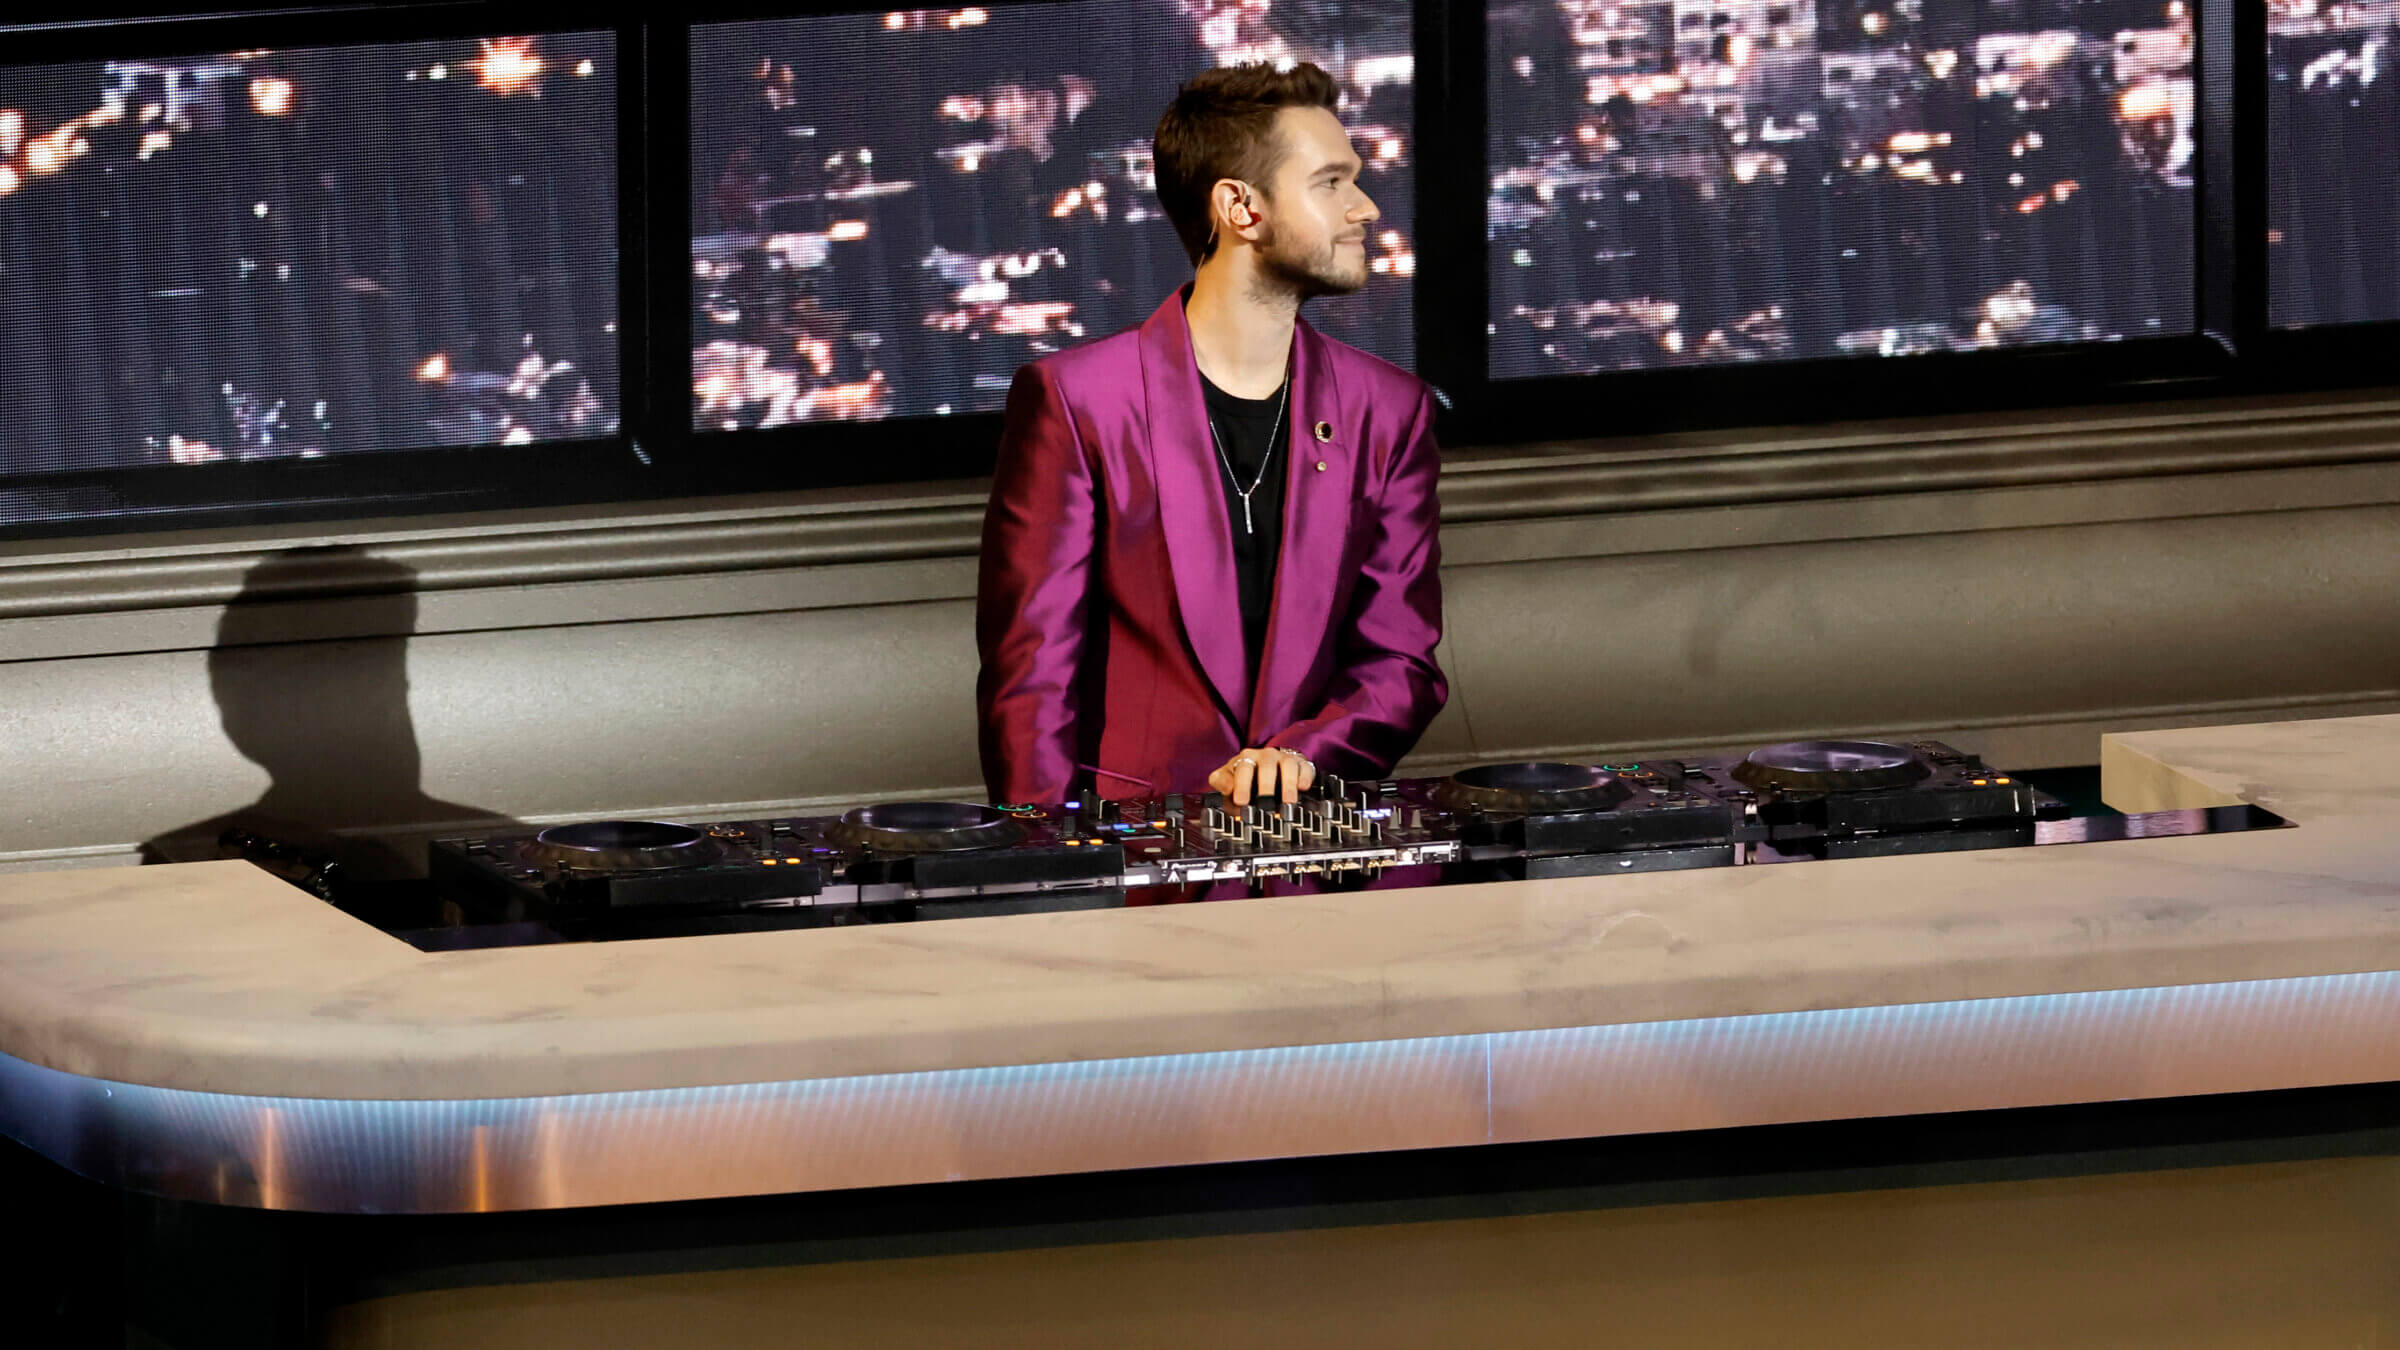 Zedd at the turntable for an execrable night at the Emmys.